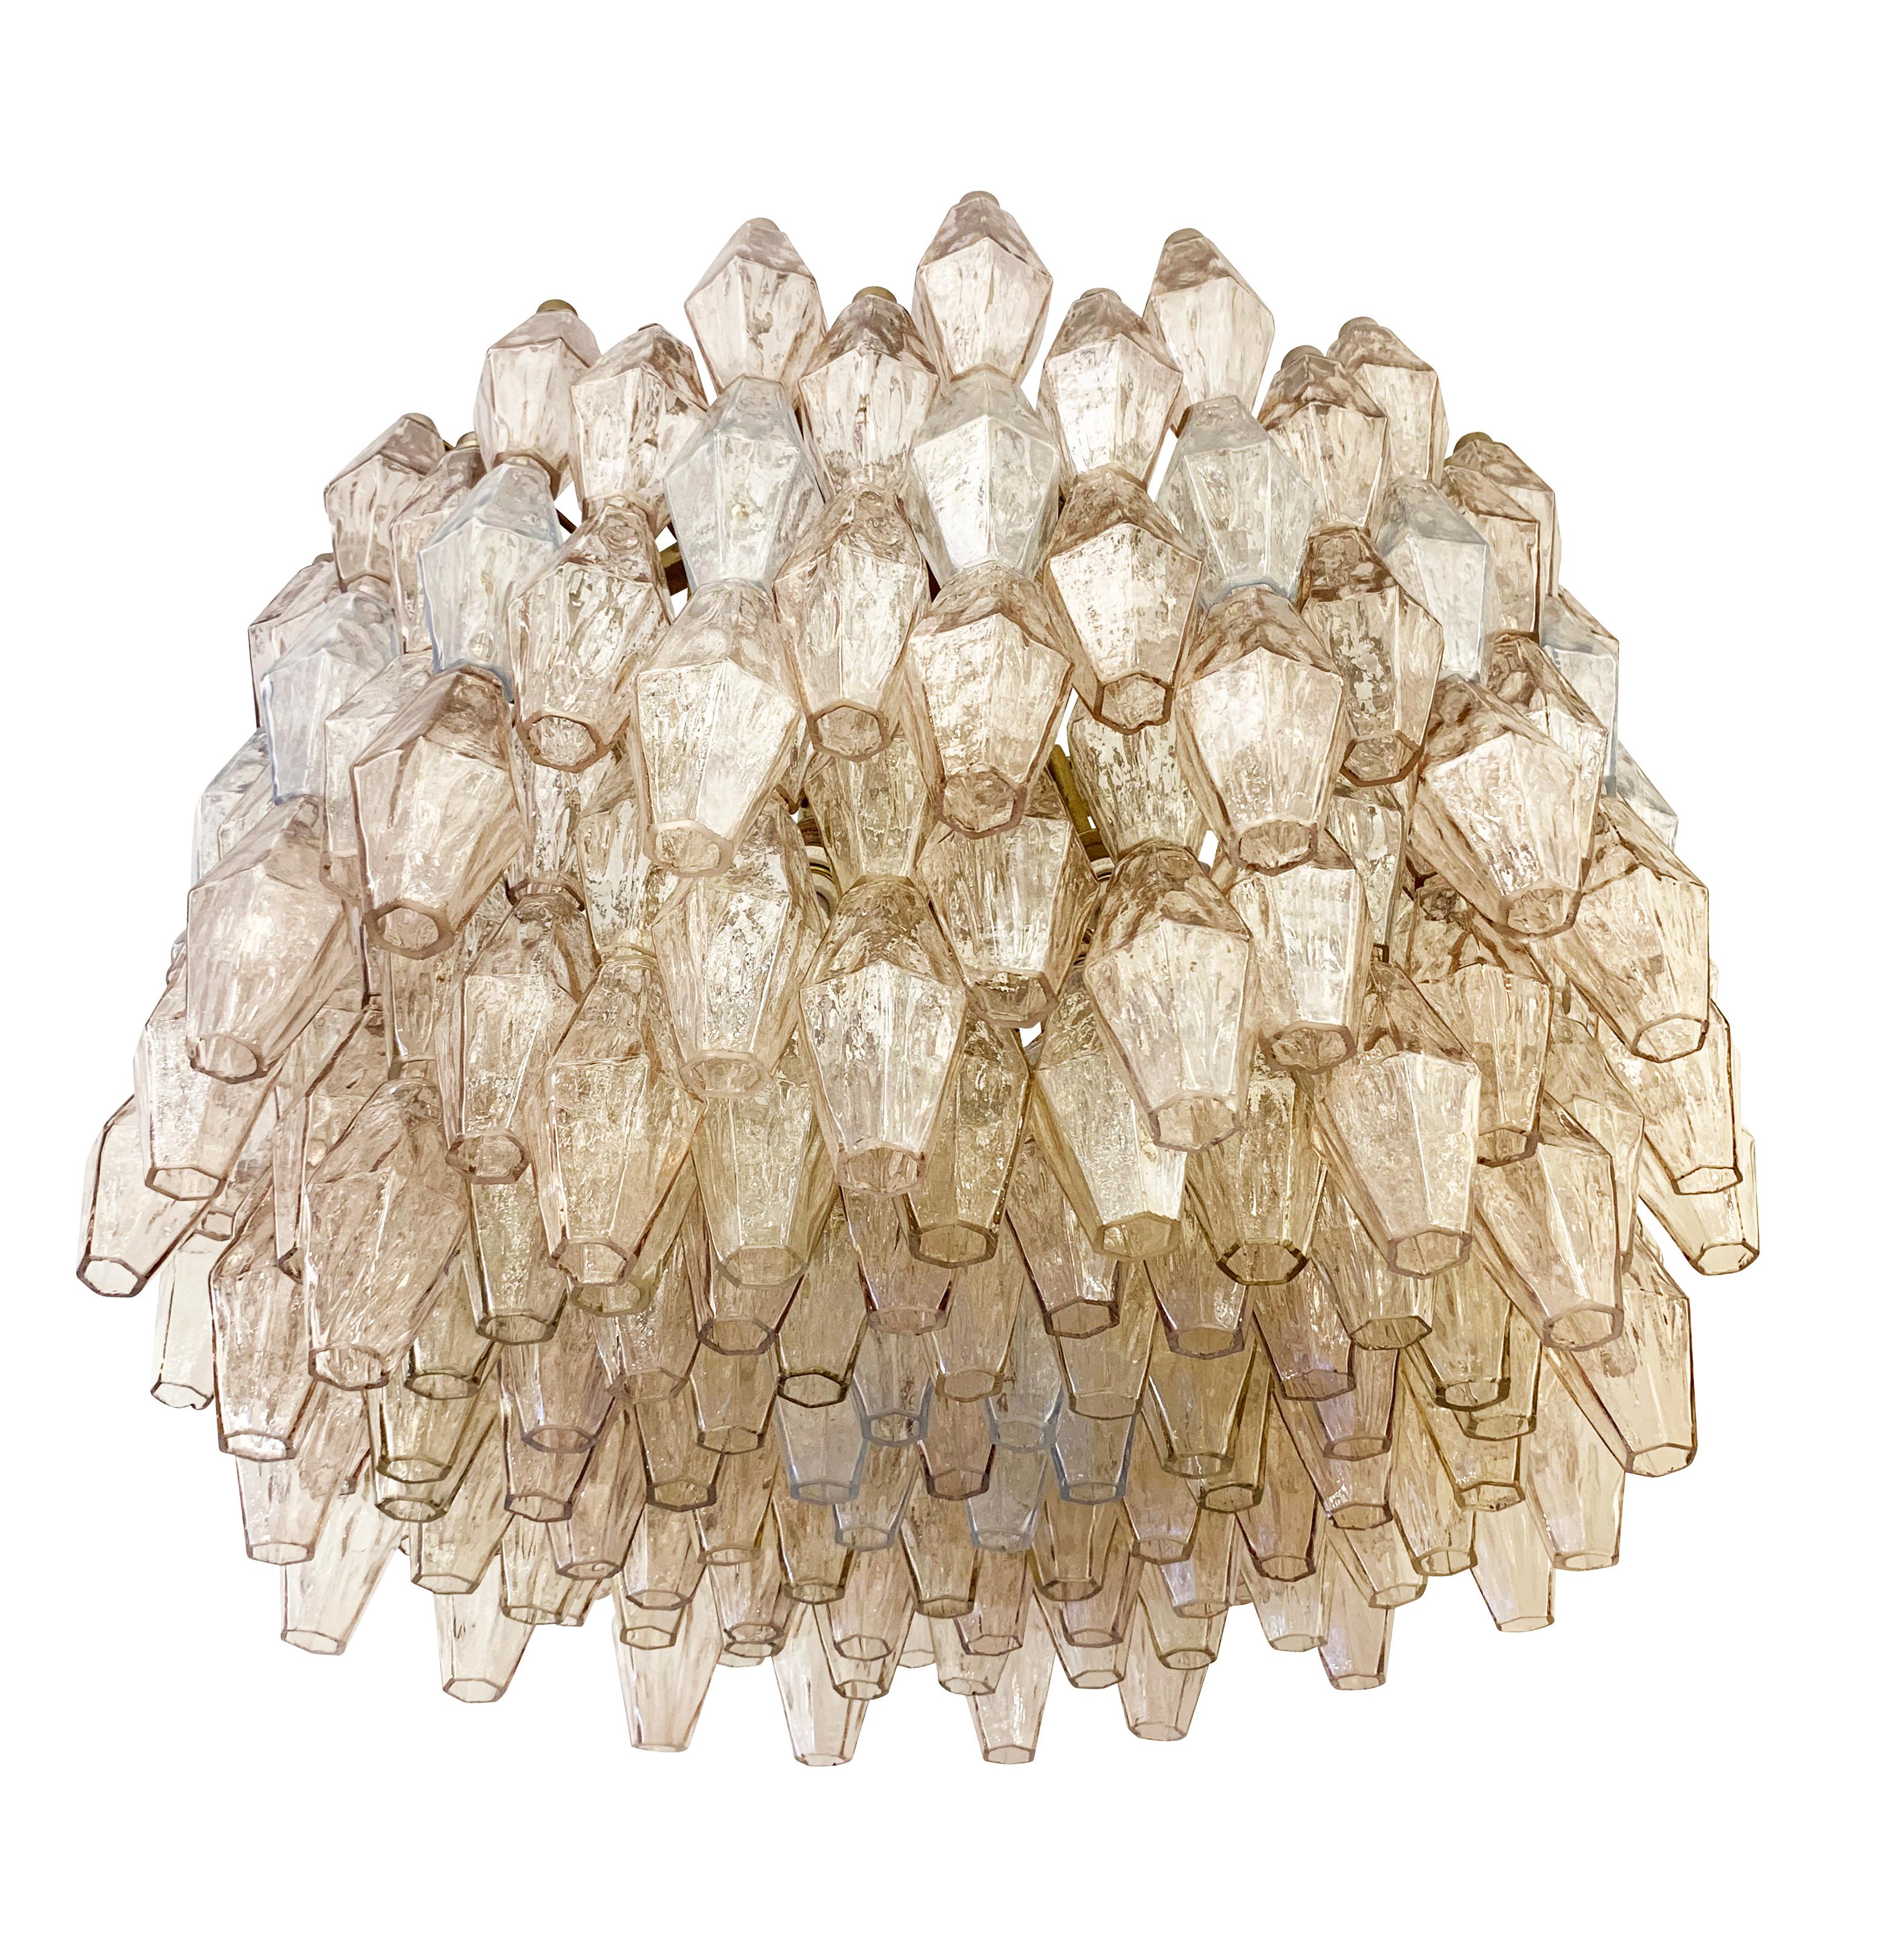 Large Italian Mid-Century chandelier by Venini with dozens of handblown Polyhedral Murano glasses. The glasses are a mix of amber, rose and blue hanging from a satin nickel frame.

Condition: Excellent vintage condition, minor wear and chips